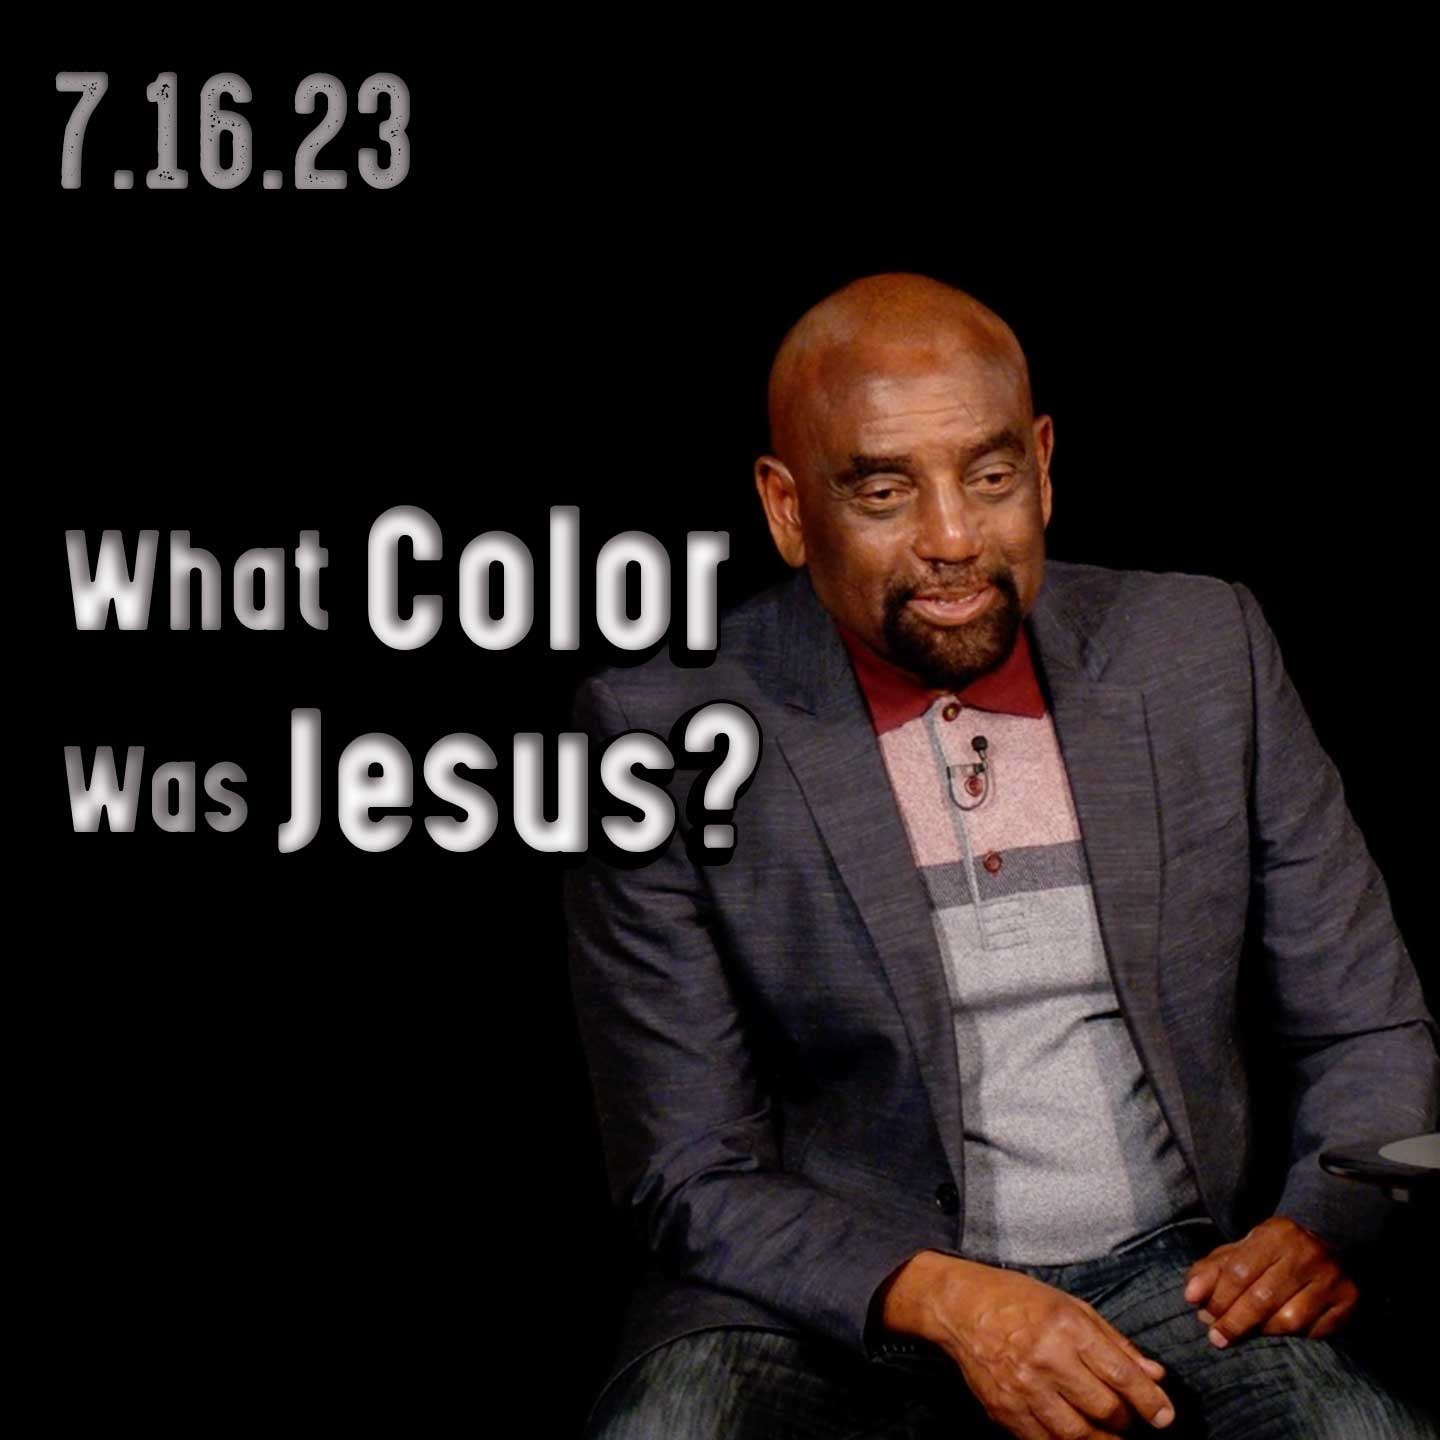 What color was Jesus? Does it take courage to speak up? Church 7/16/23